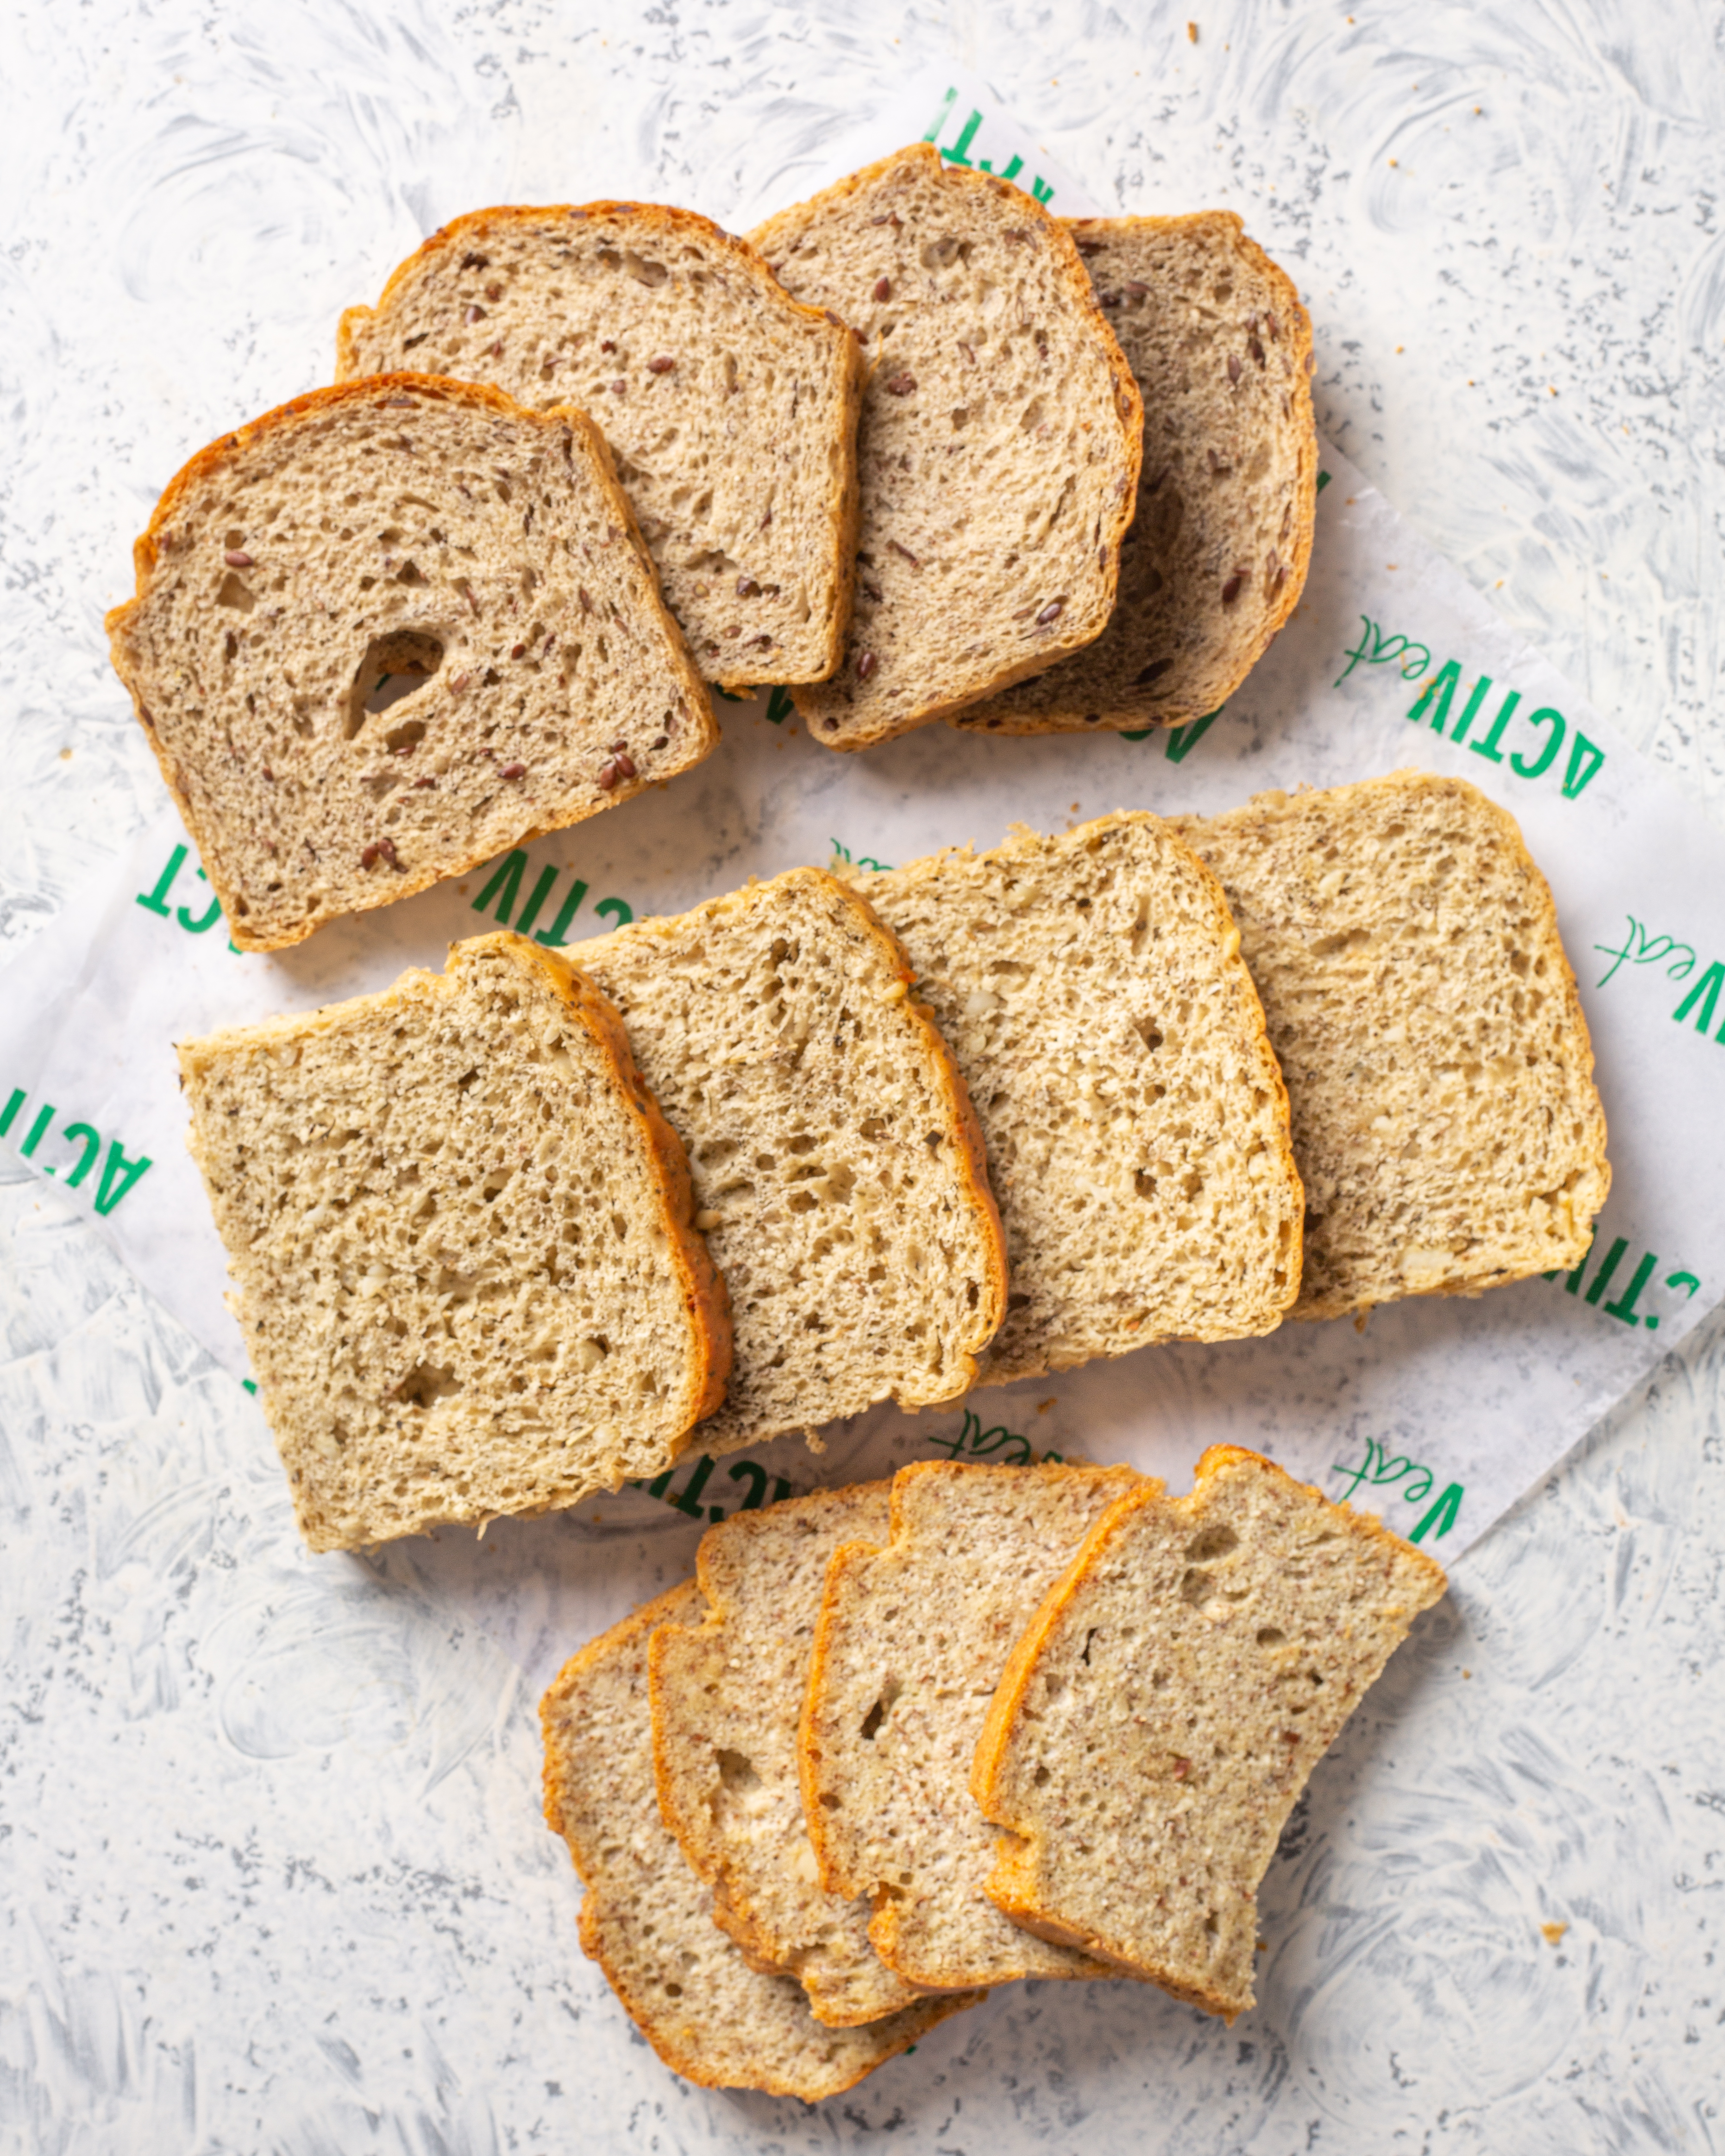 Activeat Keto Friendly bread is 100% natural